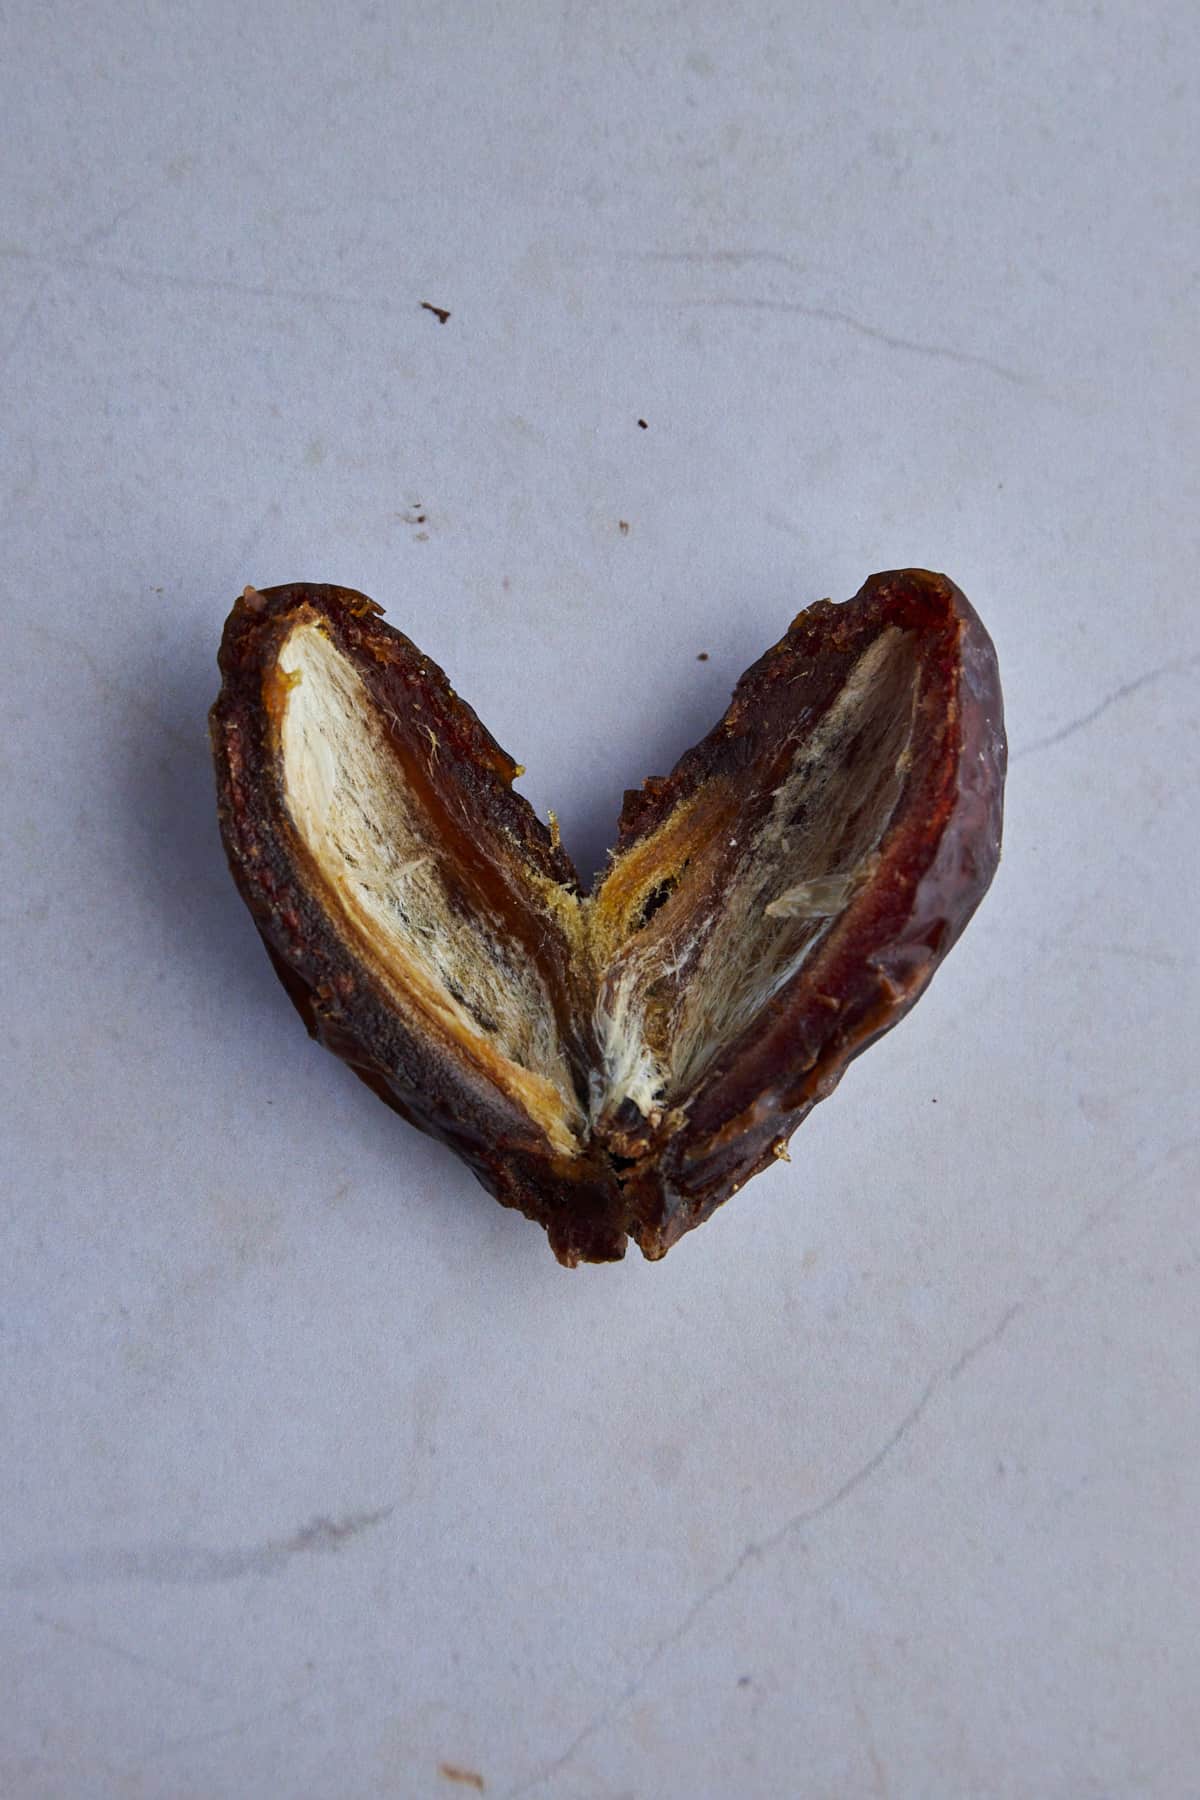 a pitted Medjool date in the shape of a heart